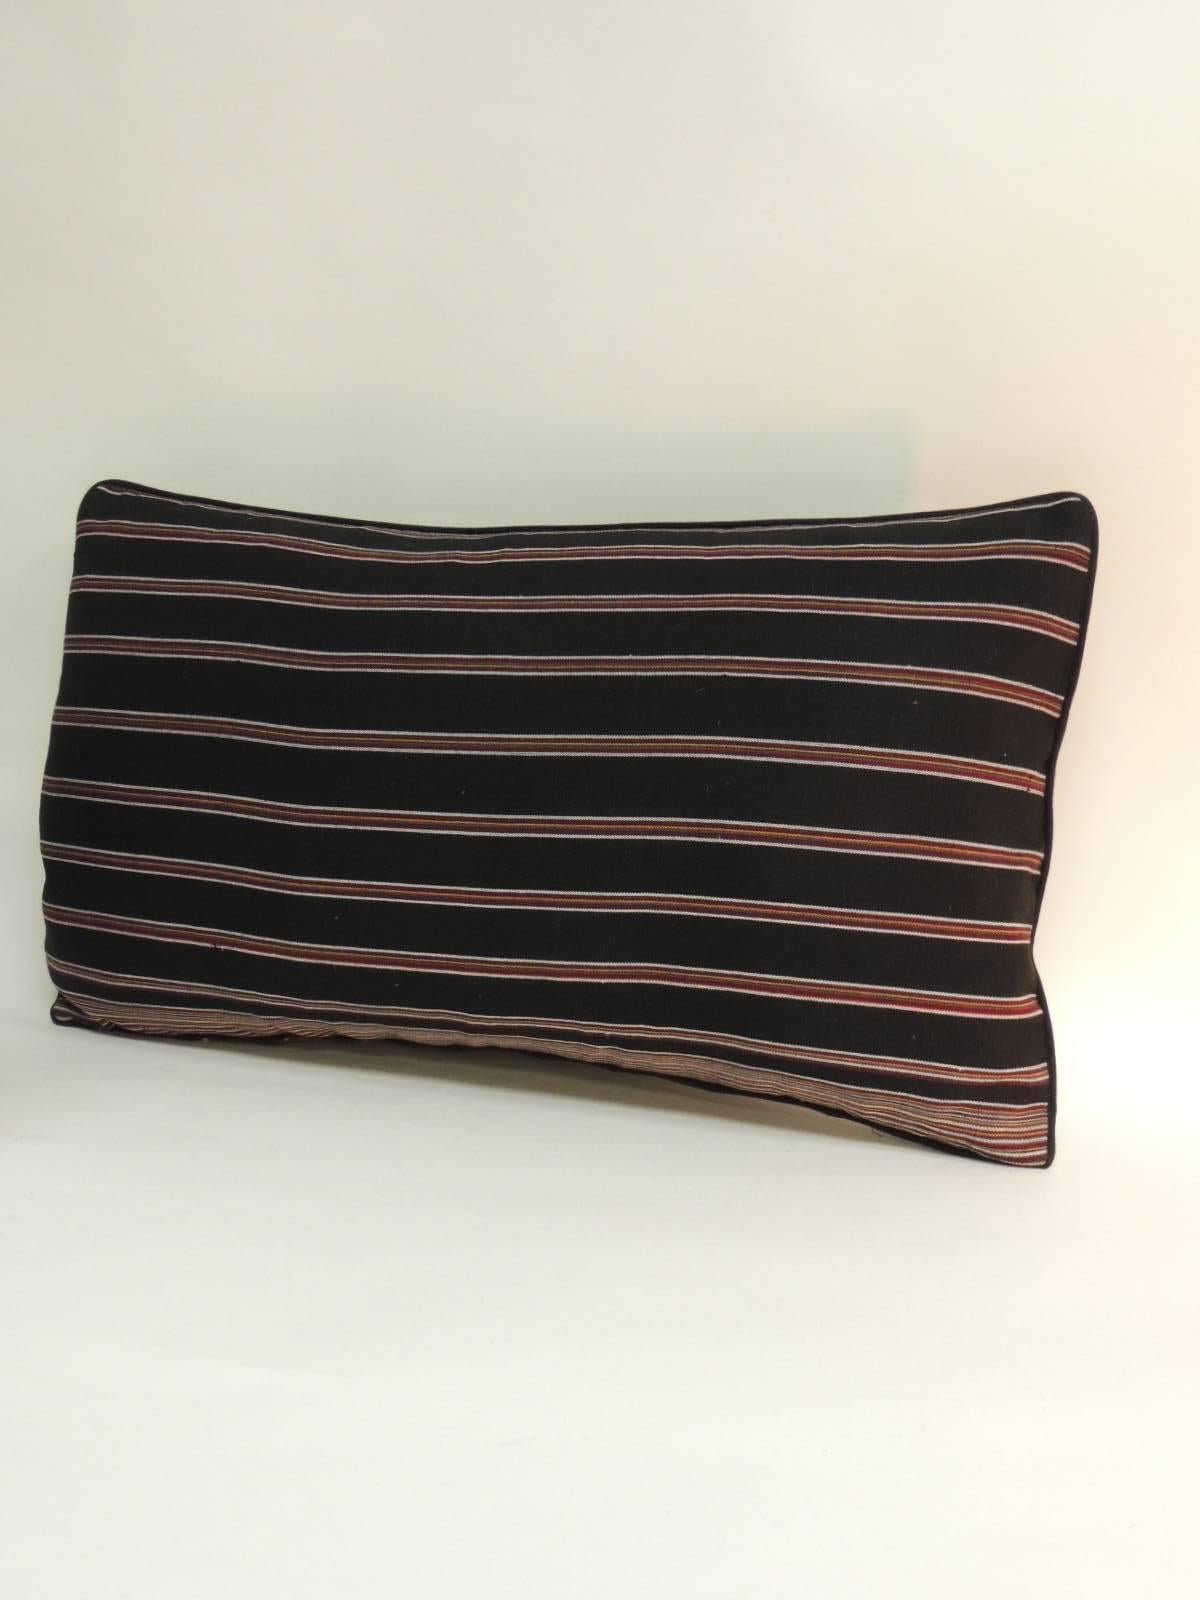 Pair of Woven Obi Red and Black Stripes Lumbar Decorative Pillows.
in shades of black and red stripes with a small cotton custom-made piping all around and  black linen backings. 
Decorative bolster pillows handcrafted and designed in the USA.